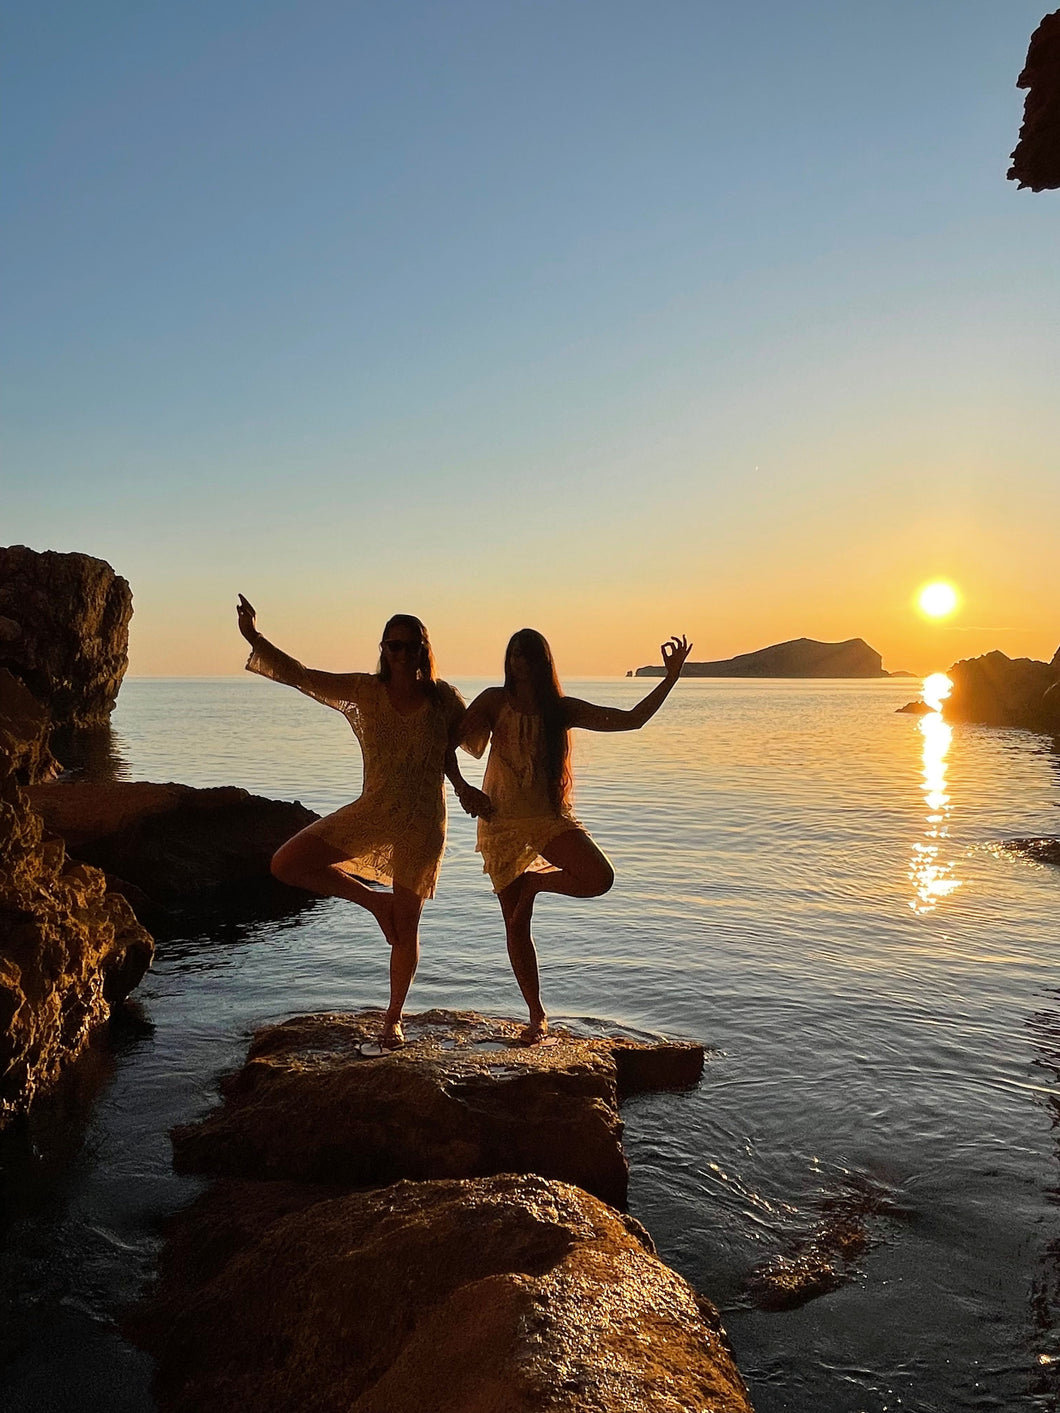 Embrace tranquility and mindfulness during our meditation retreats in Ibiza